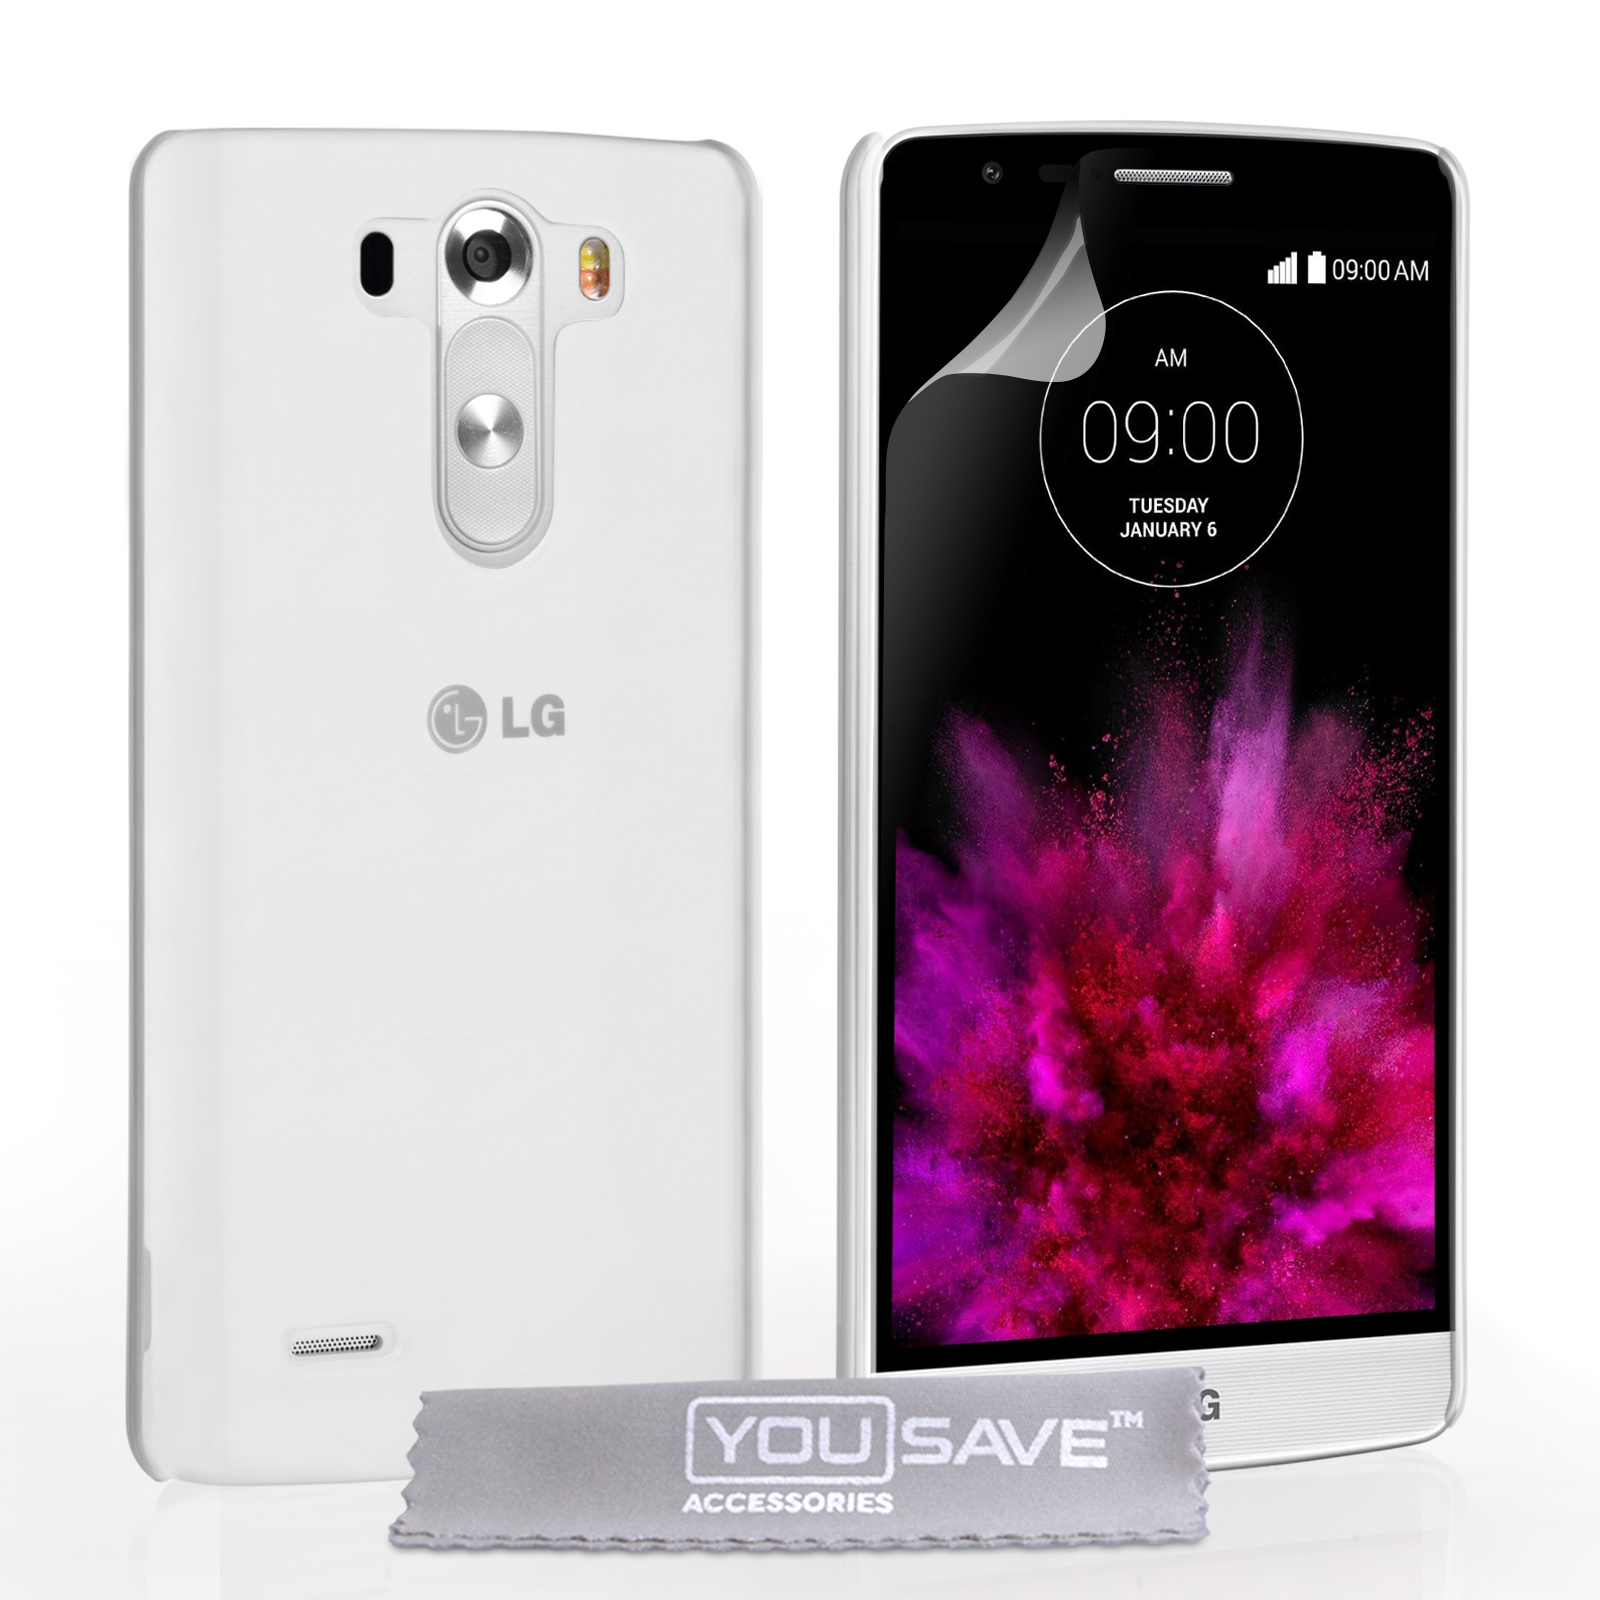 YouSave Accessories LG G4 Hard Case - Crystal Clear